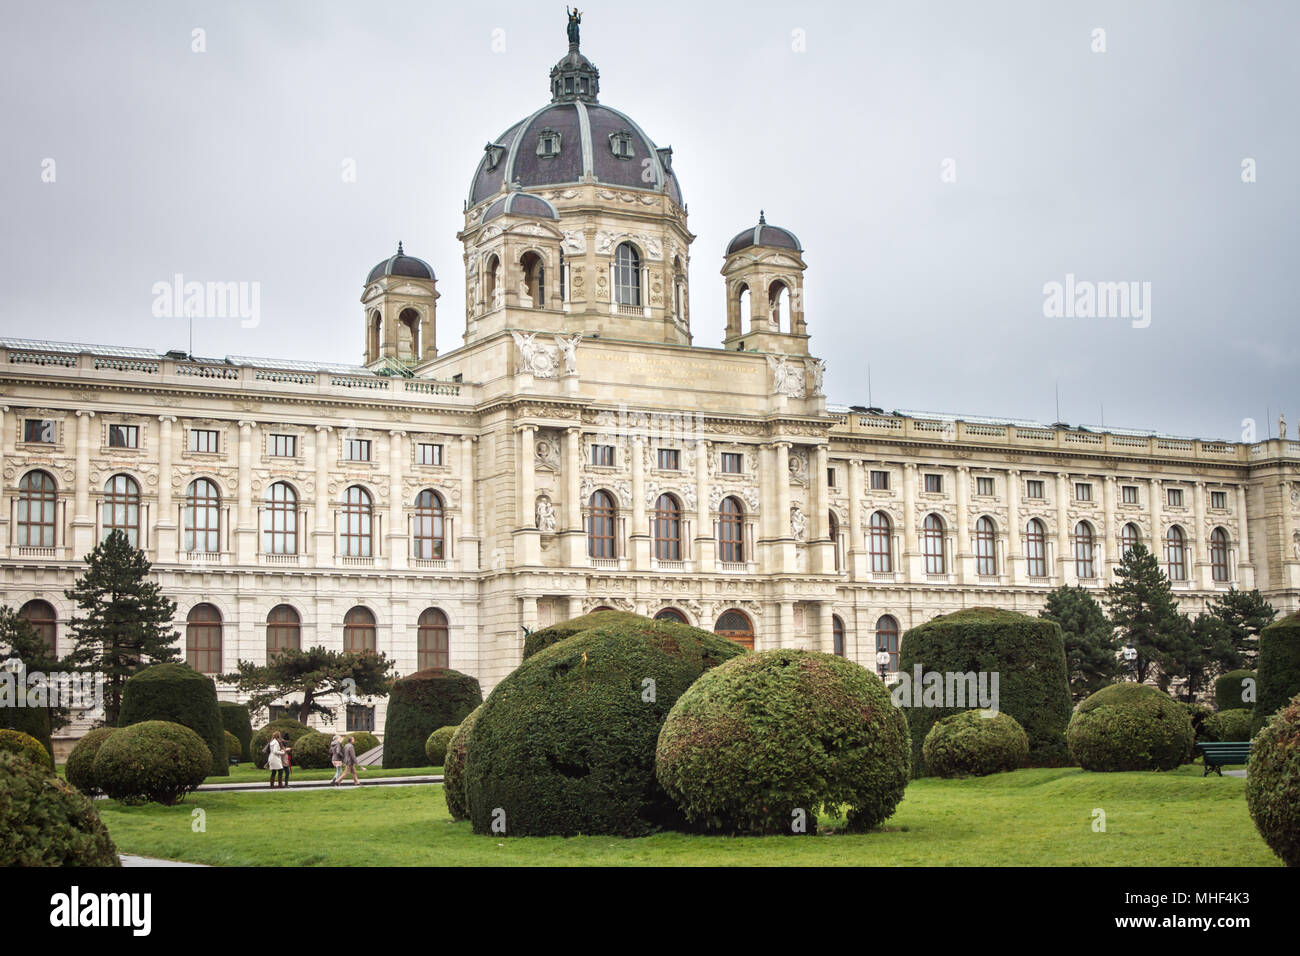 Museum quarter in Vienna, capital of Austria on a rainy day Stock Photo